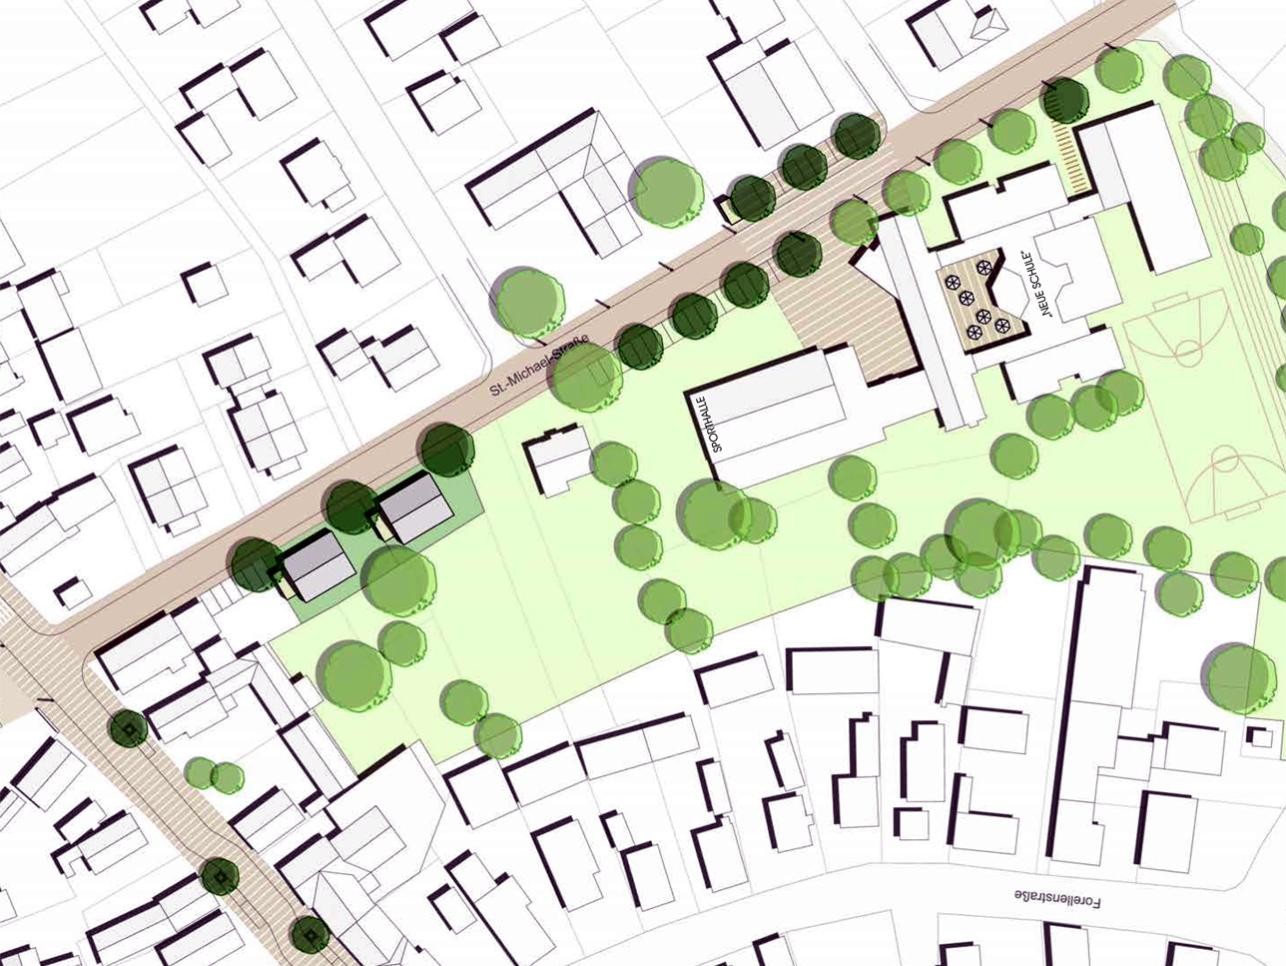 Plan school Wintersdorf with streets, houses and trees.